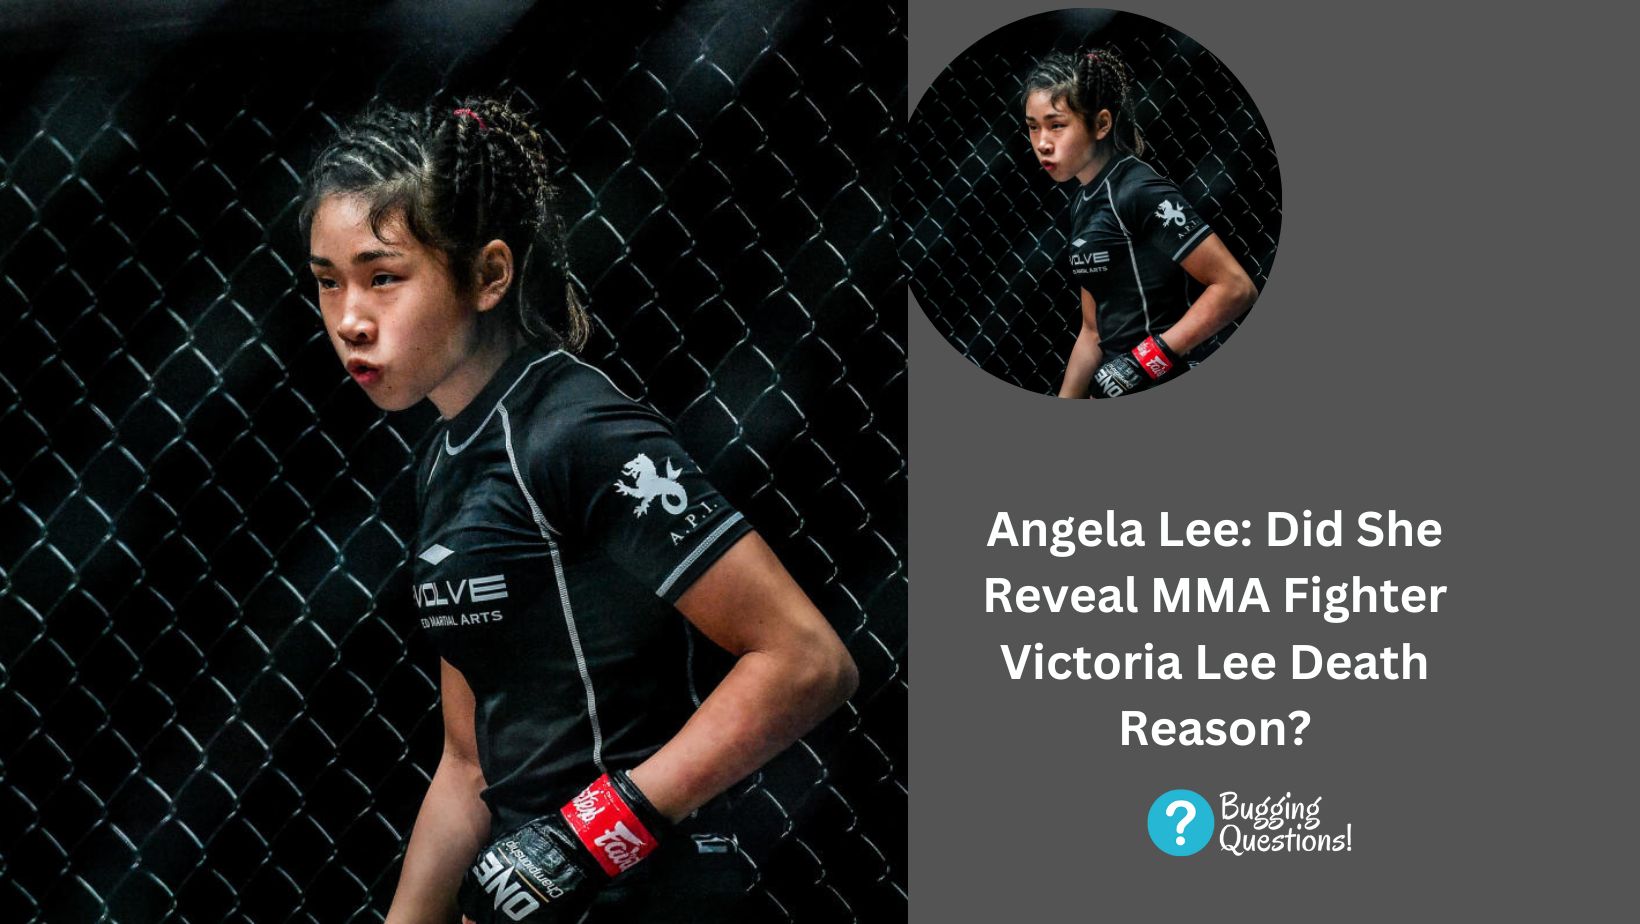 Angela Lee: Did She Reveal MMA Fighter Victoria Lee Death Reason?